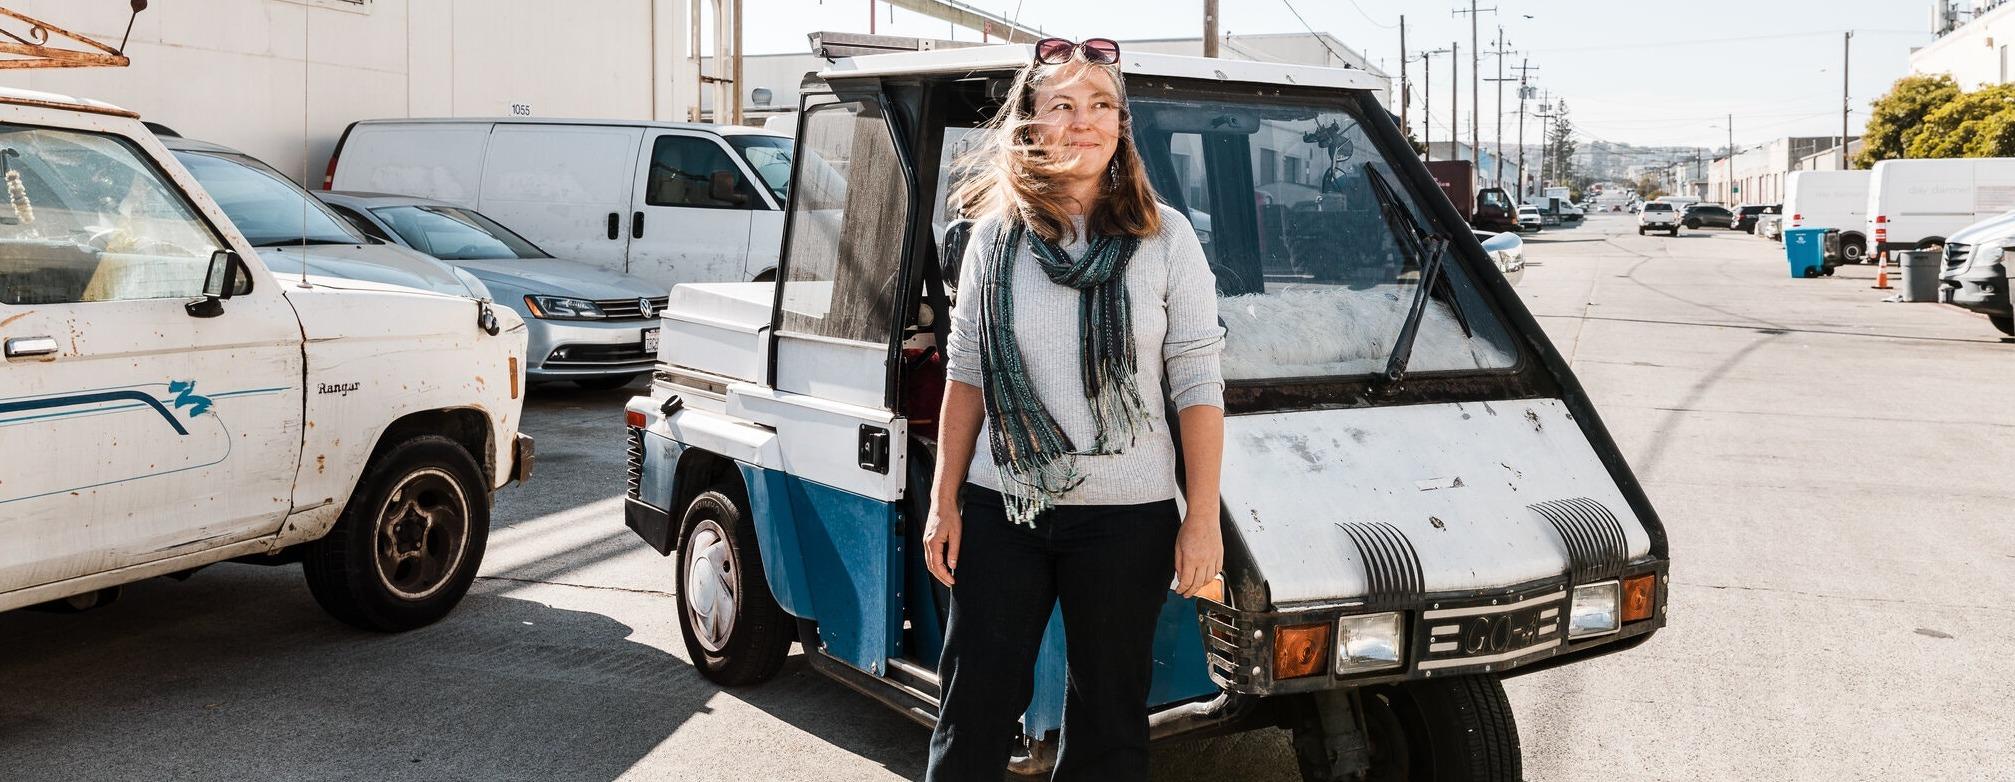 Reclaimed three-wheel ‘meter maid’ cars all the rage in San Francisco